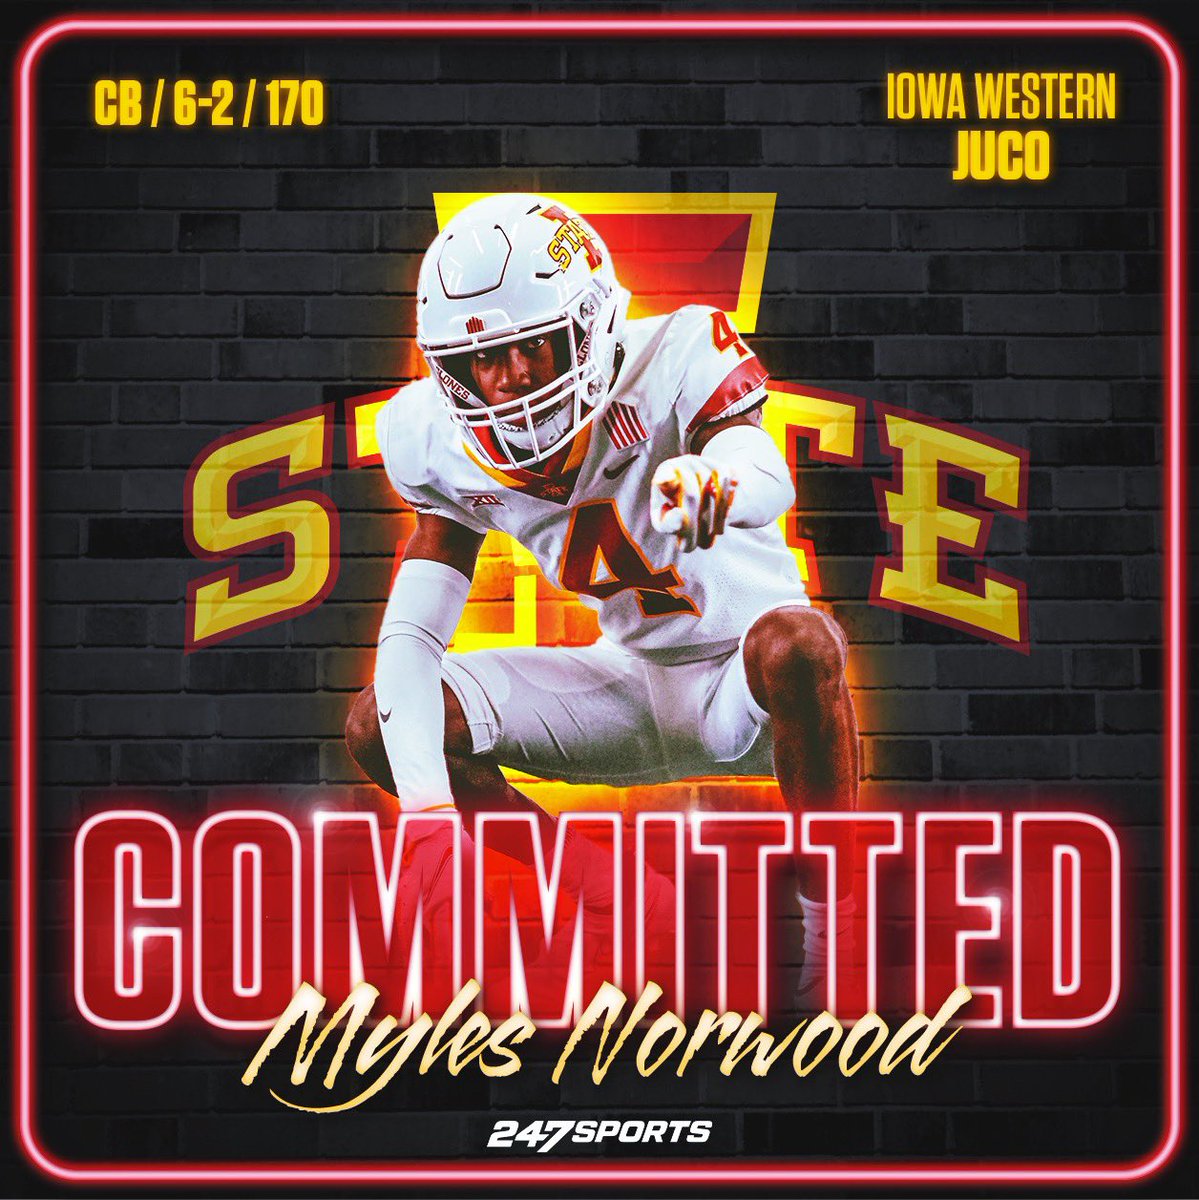 CB MYLES NORWOOD makes things official #Cyclones